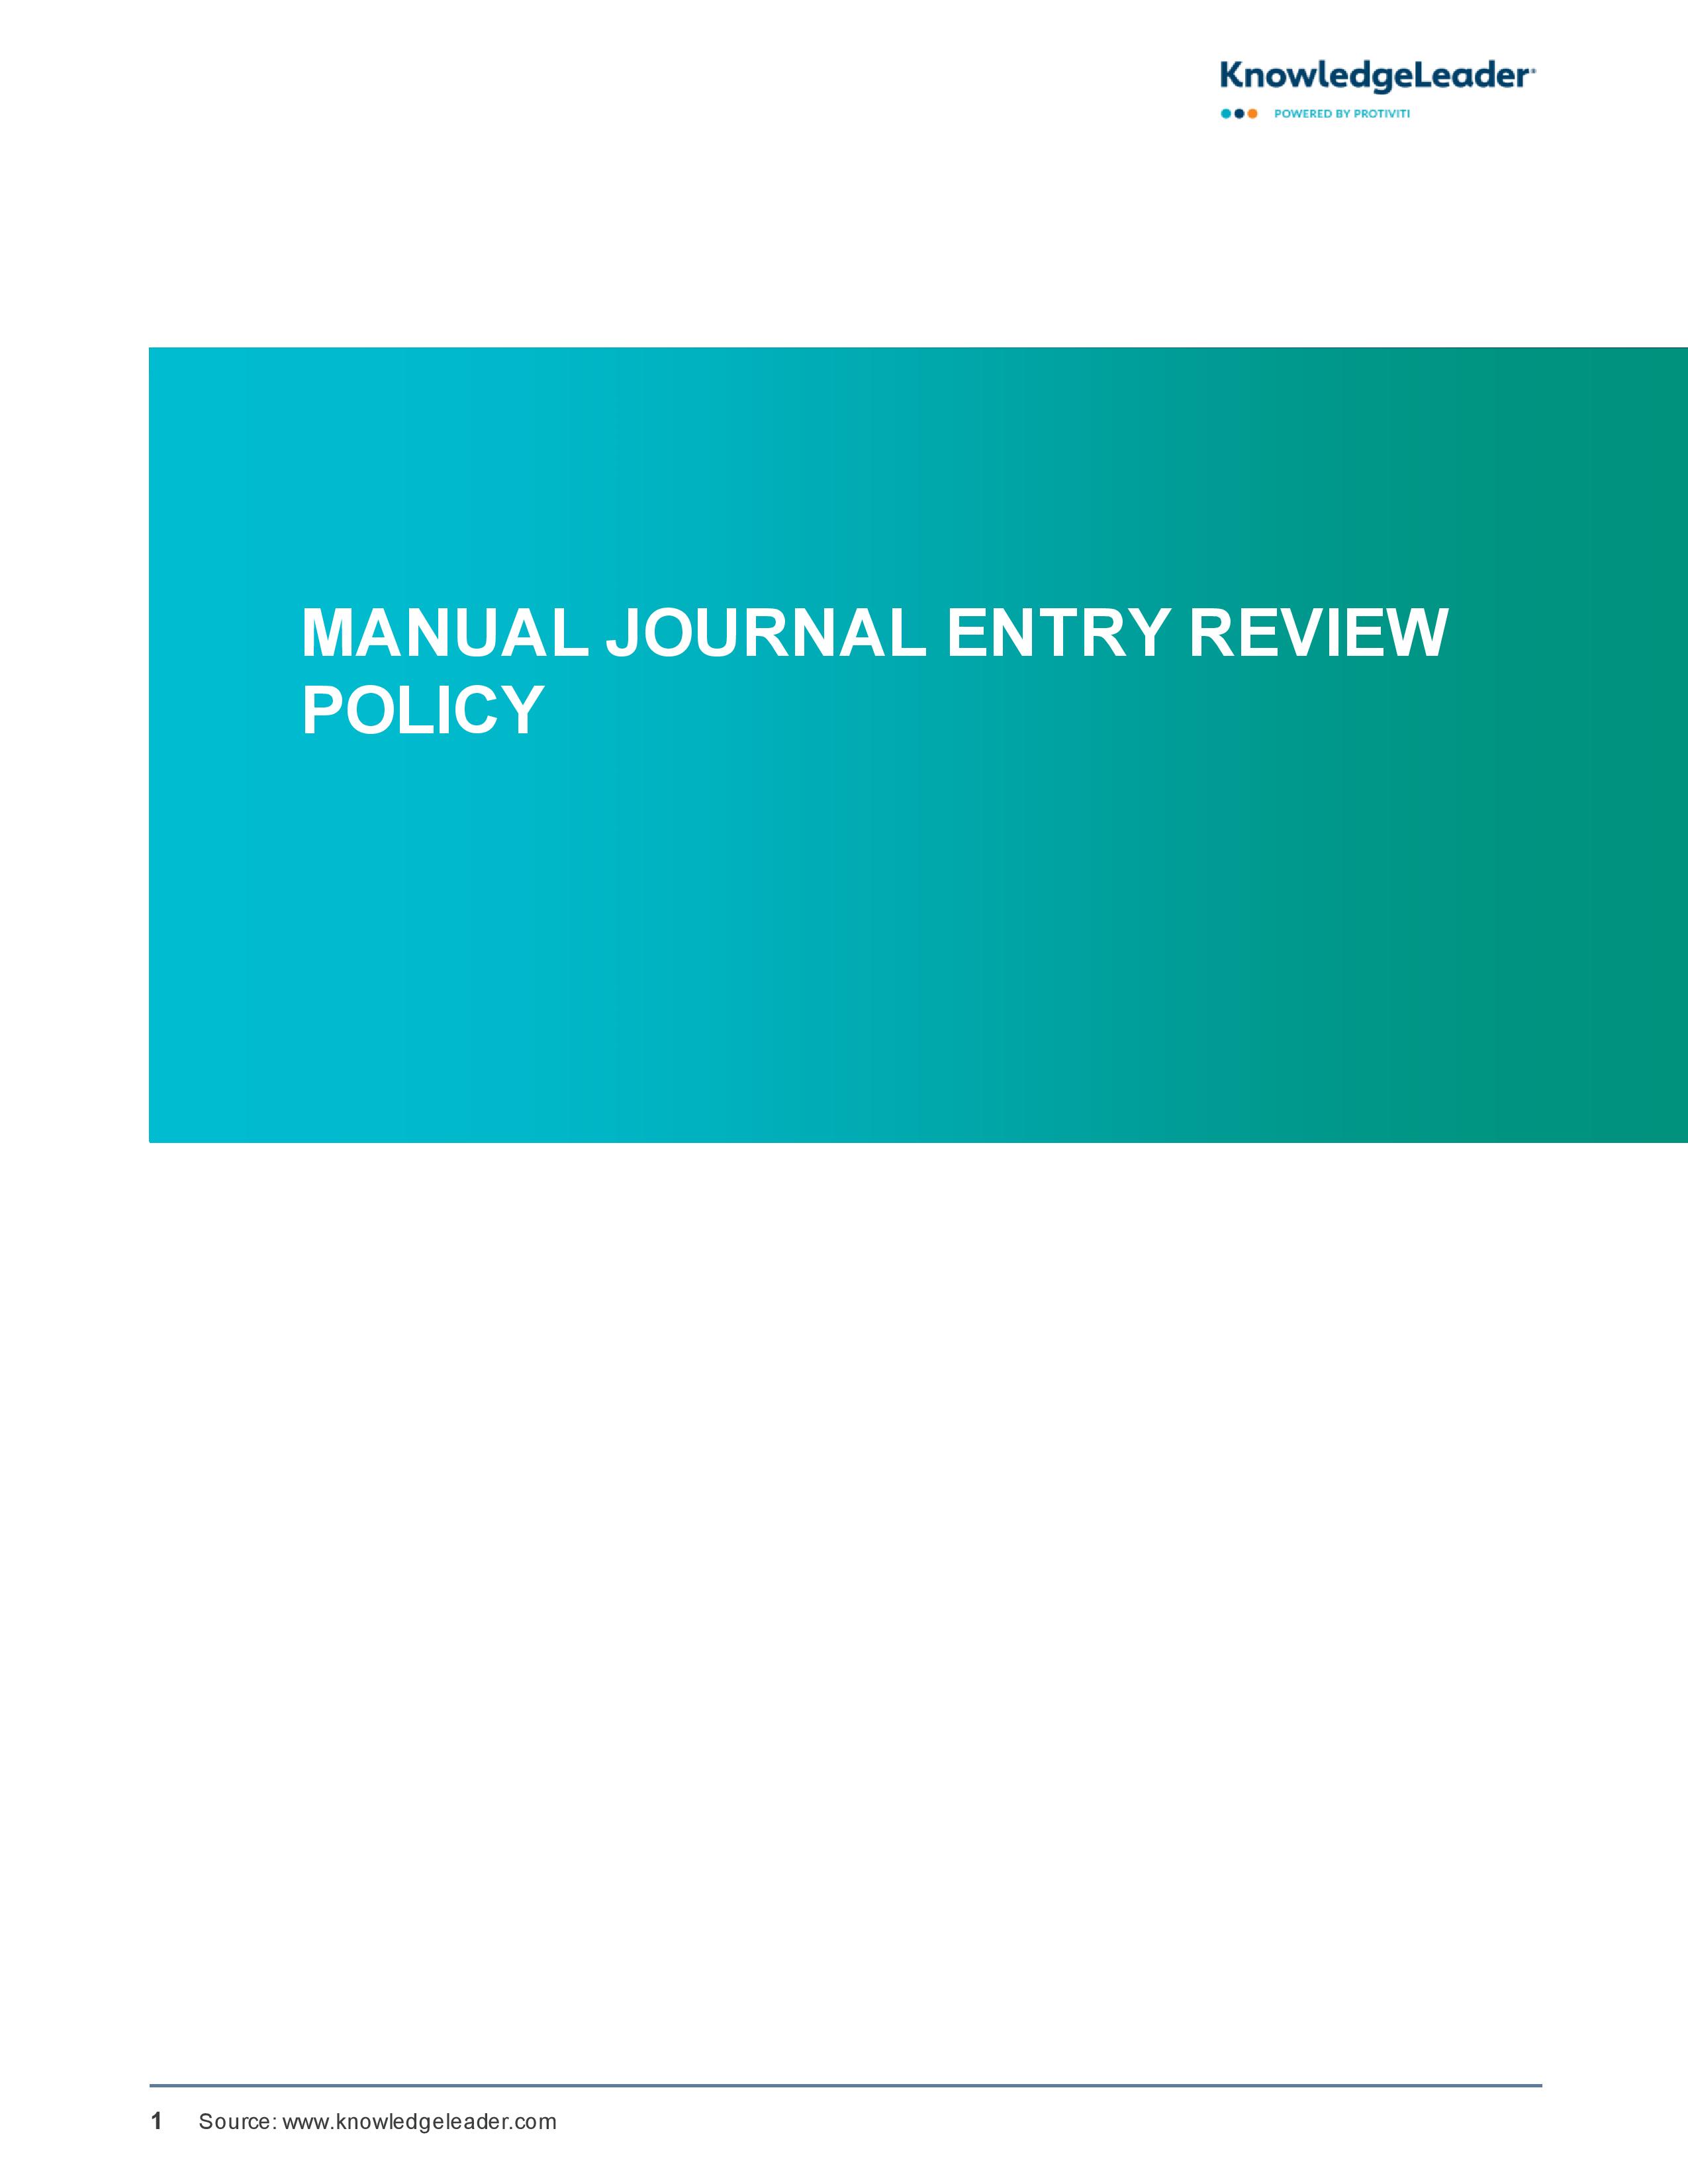 Screenshot of the first page of Manual Journal Entry Review Policy